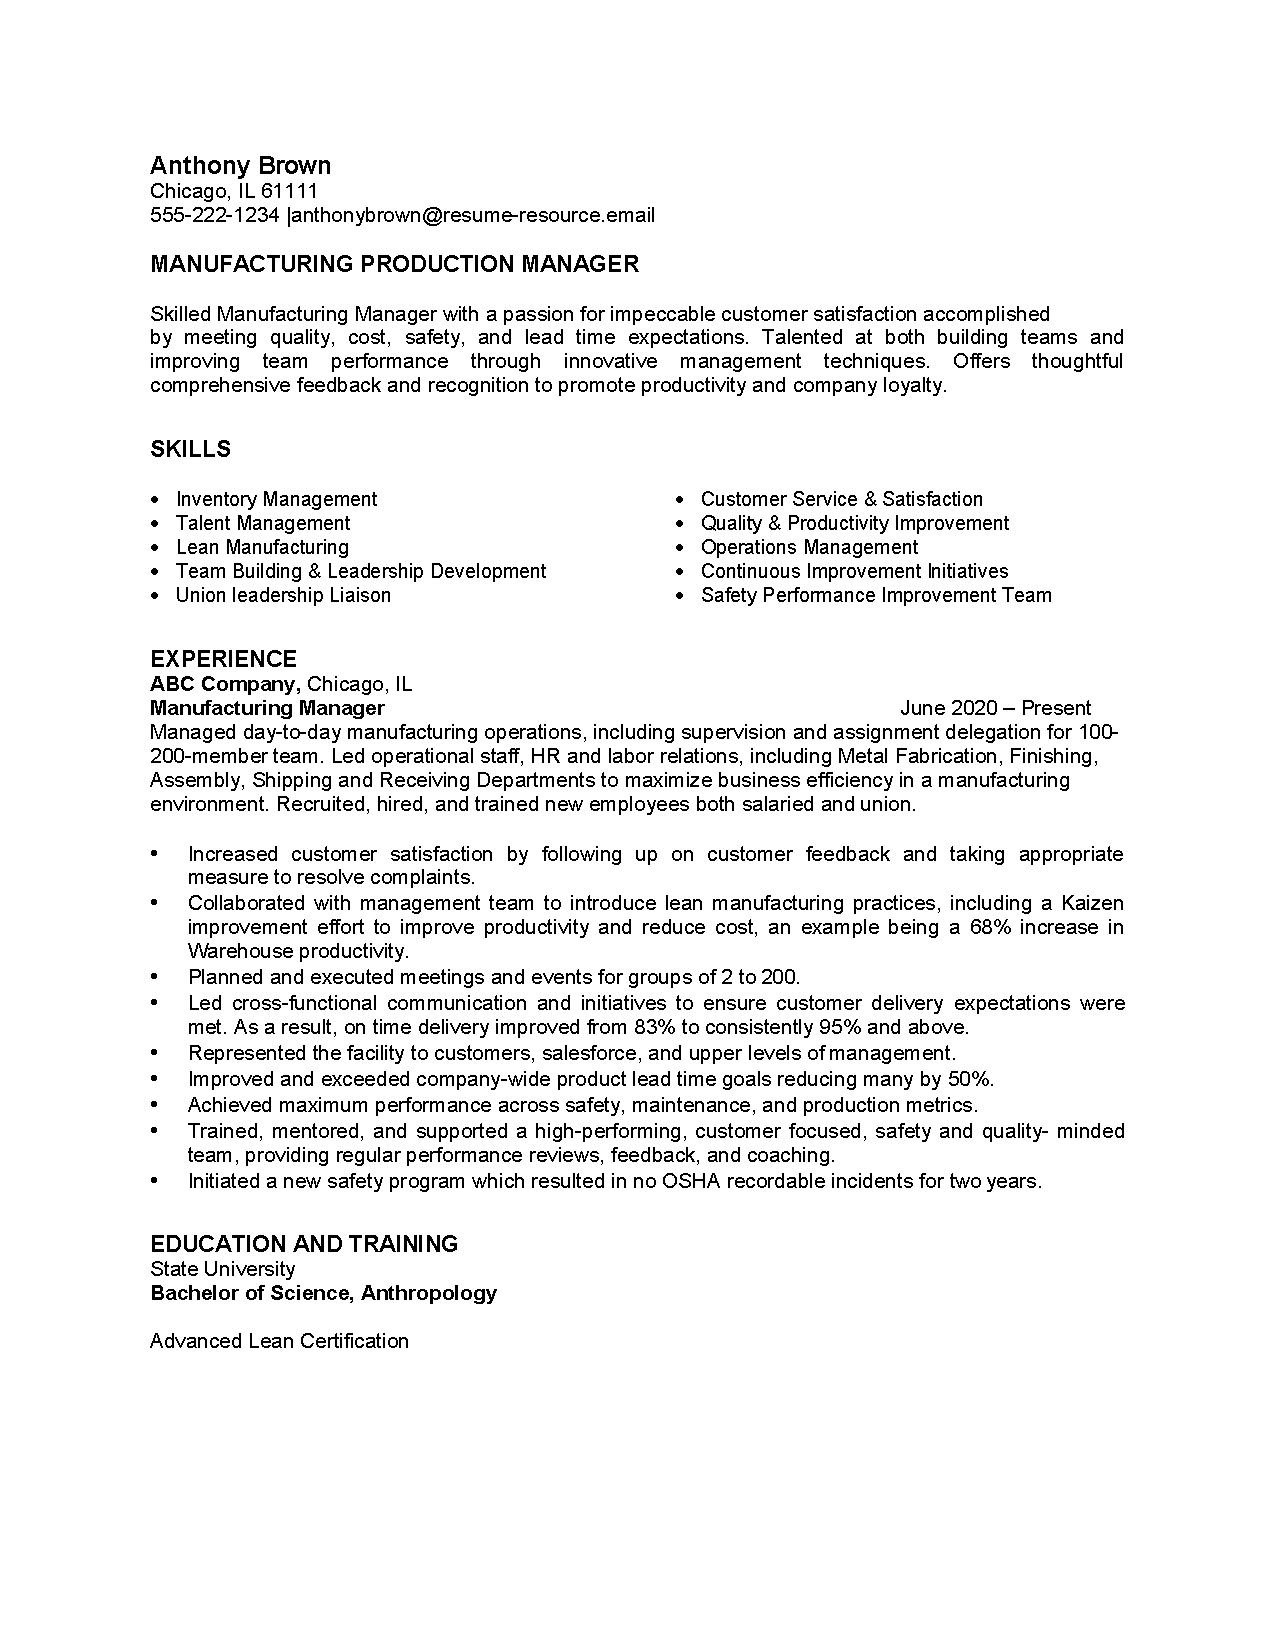 00013 manufacturing resume example